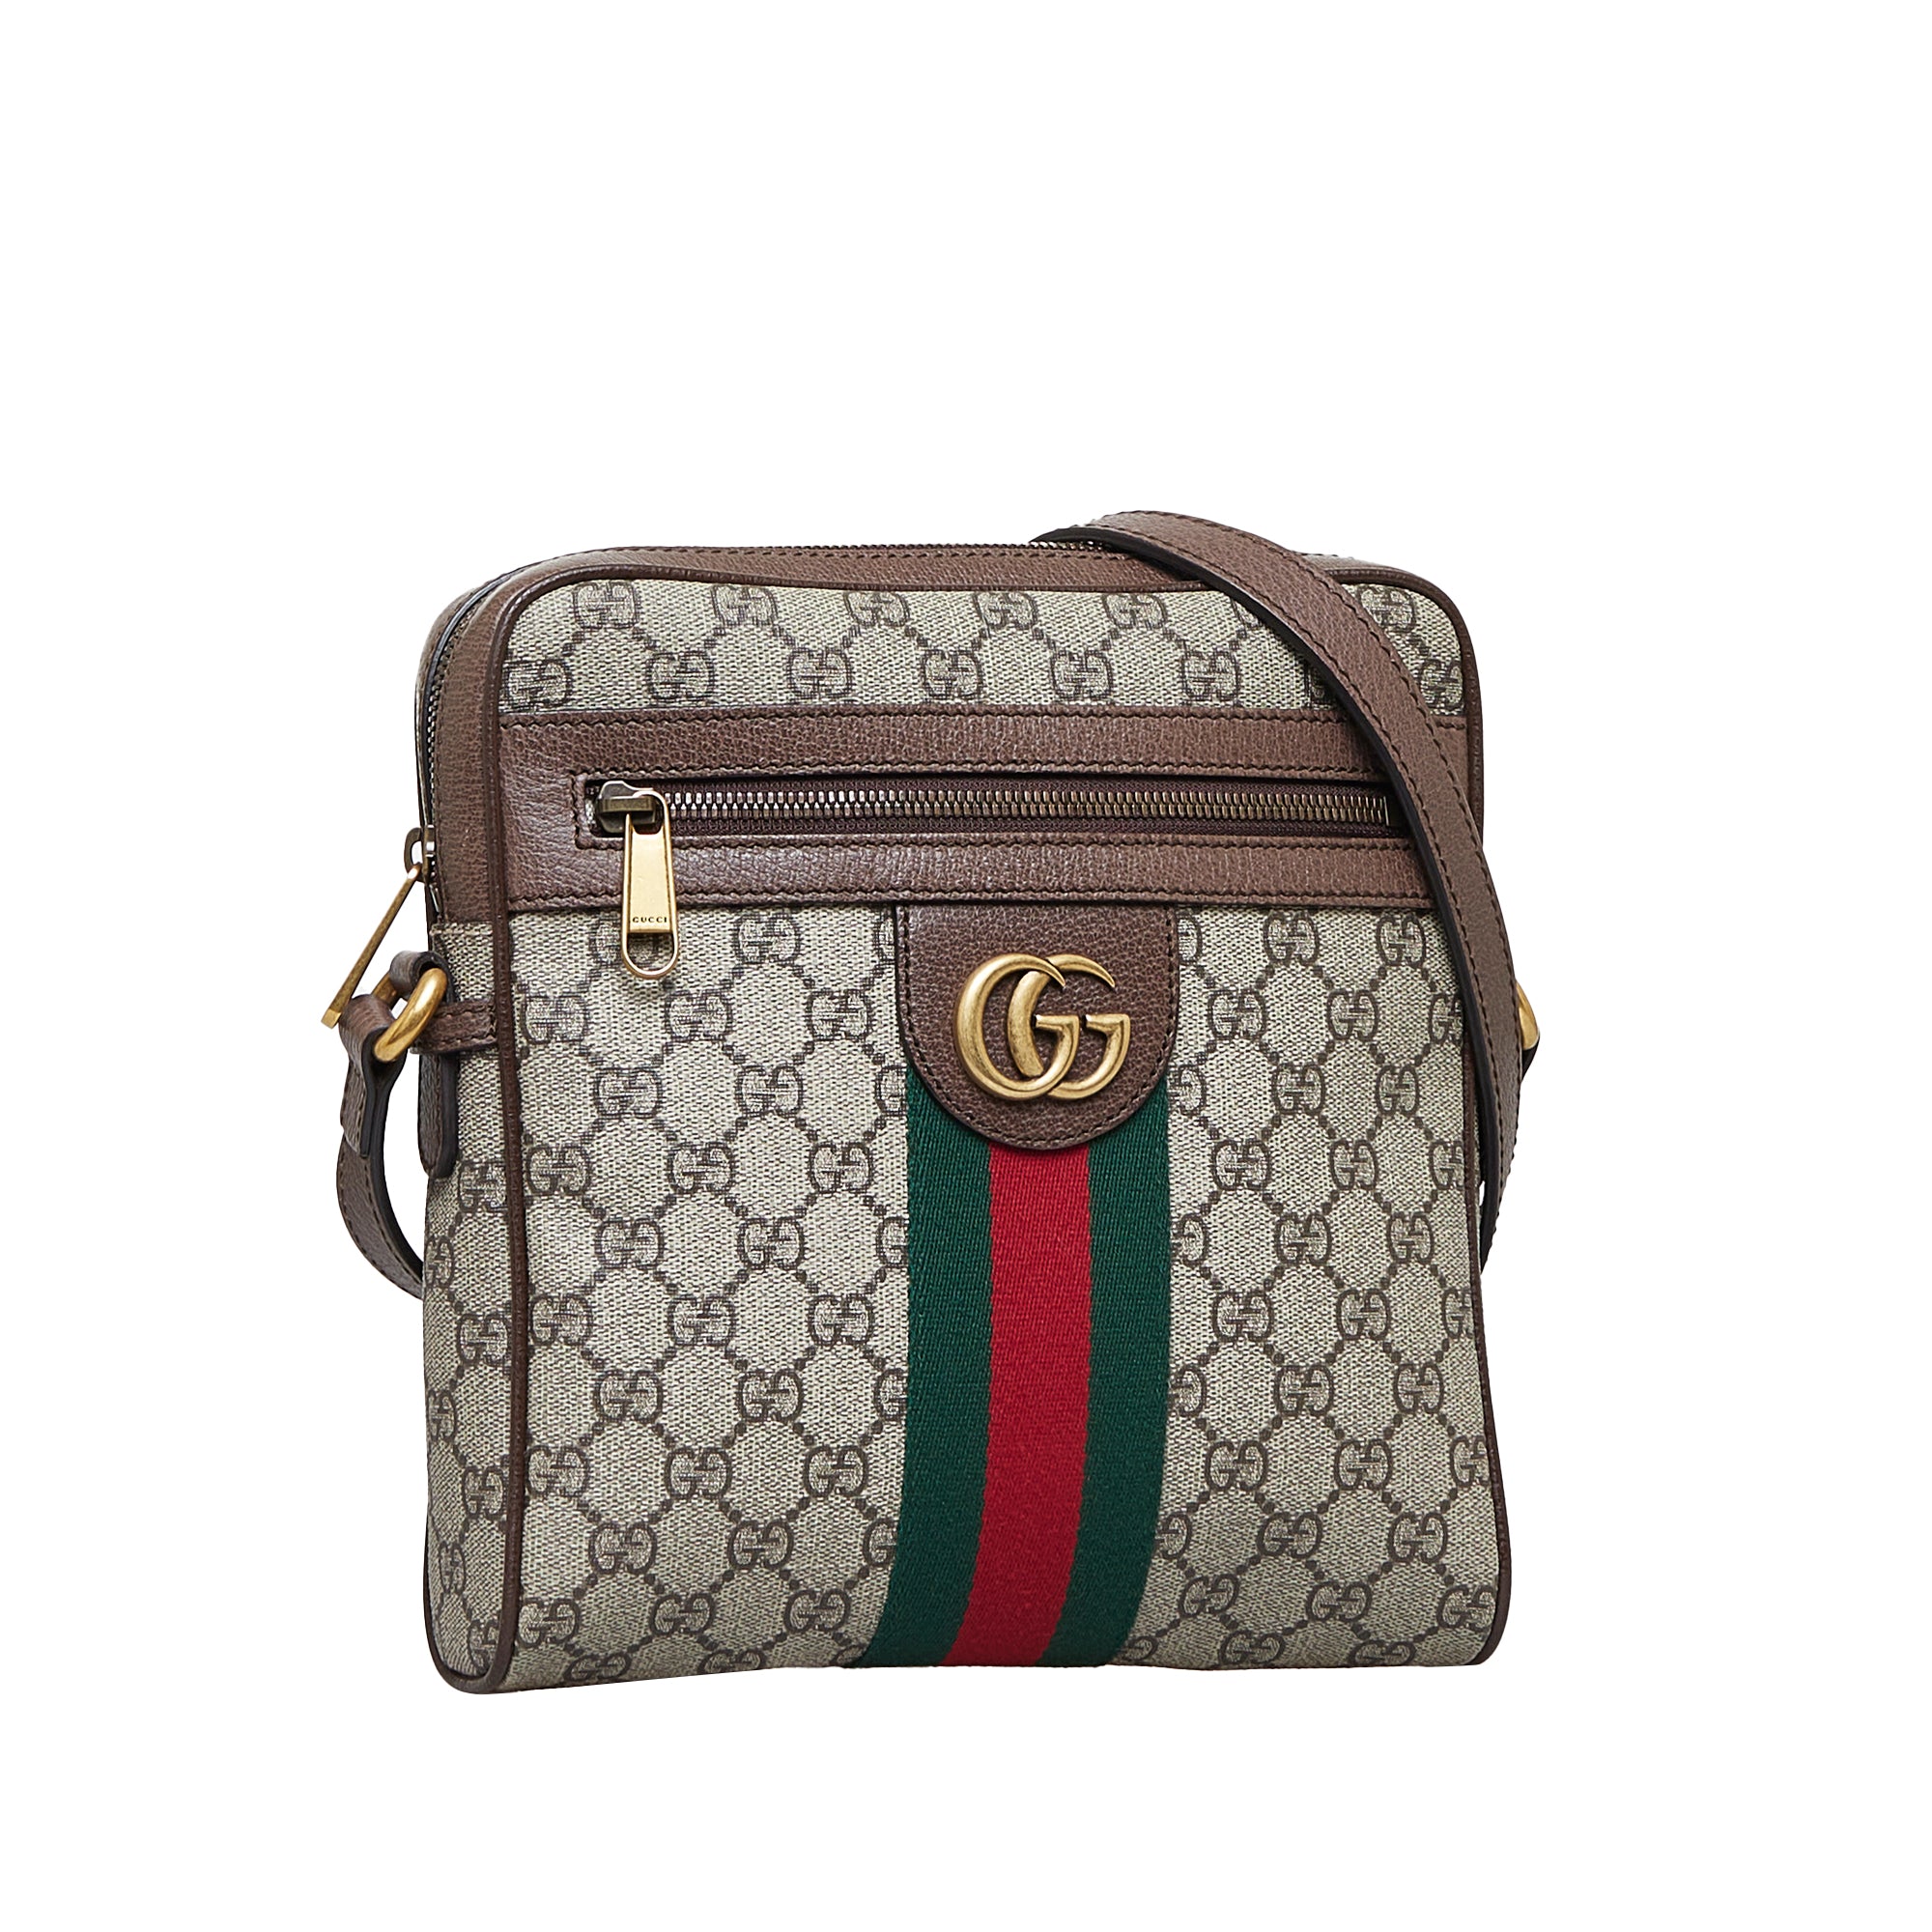 10 Best Designer Phone Cases : Gucci, Dior, and More  Bags, Leather  crossbody bag small, Small shoulder bag